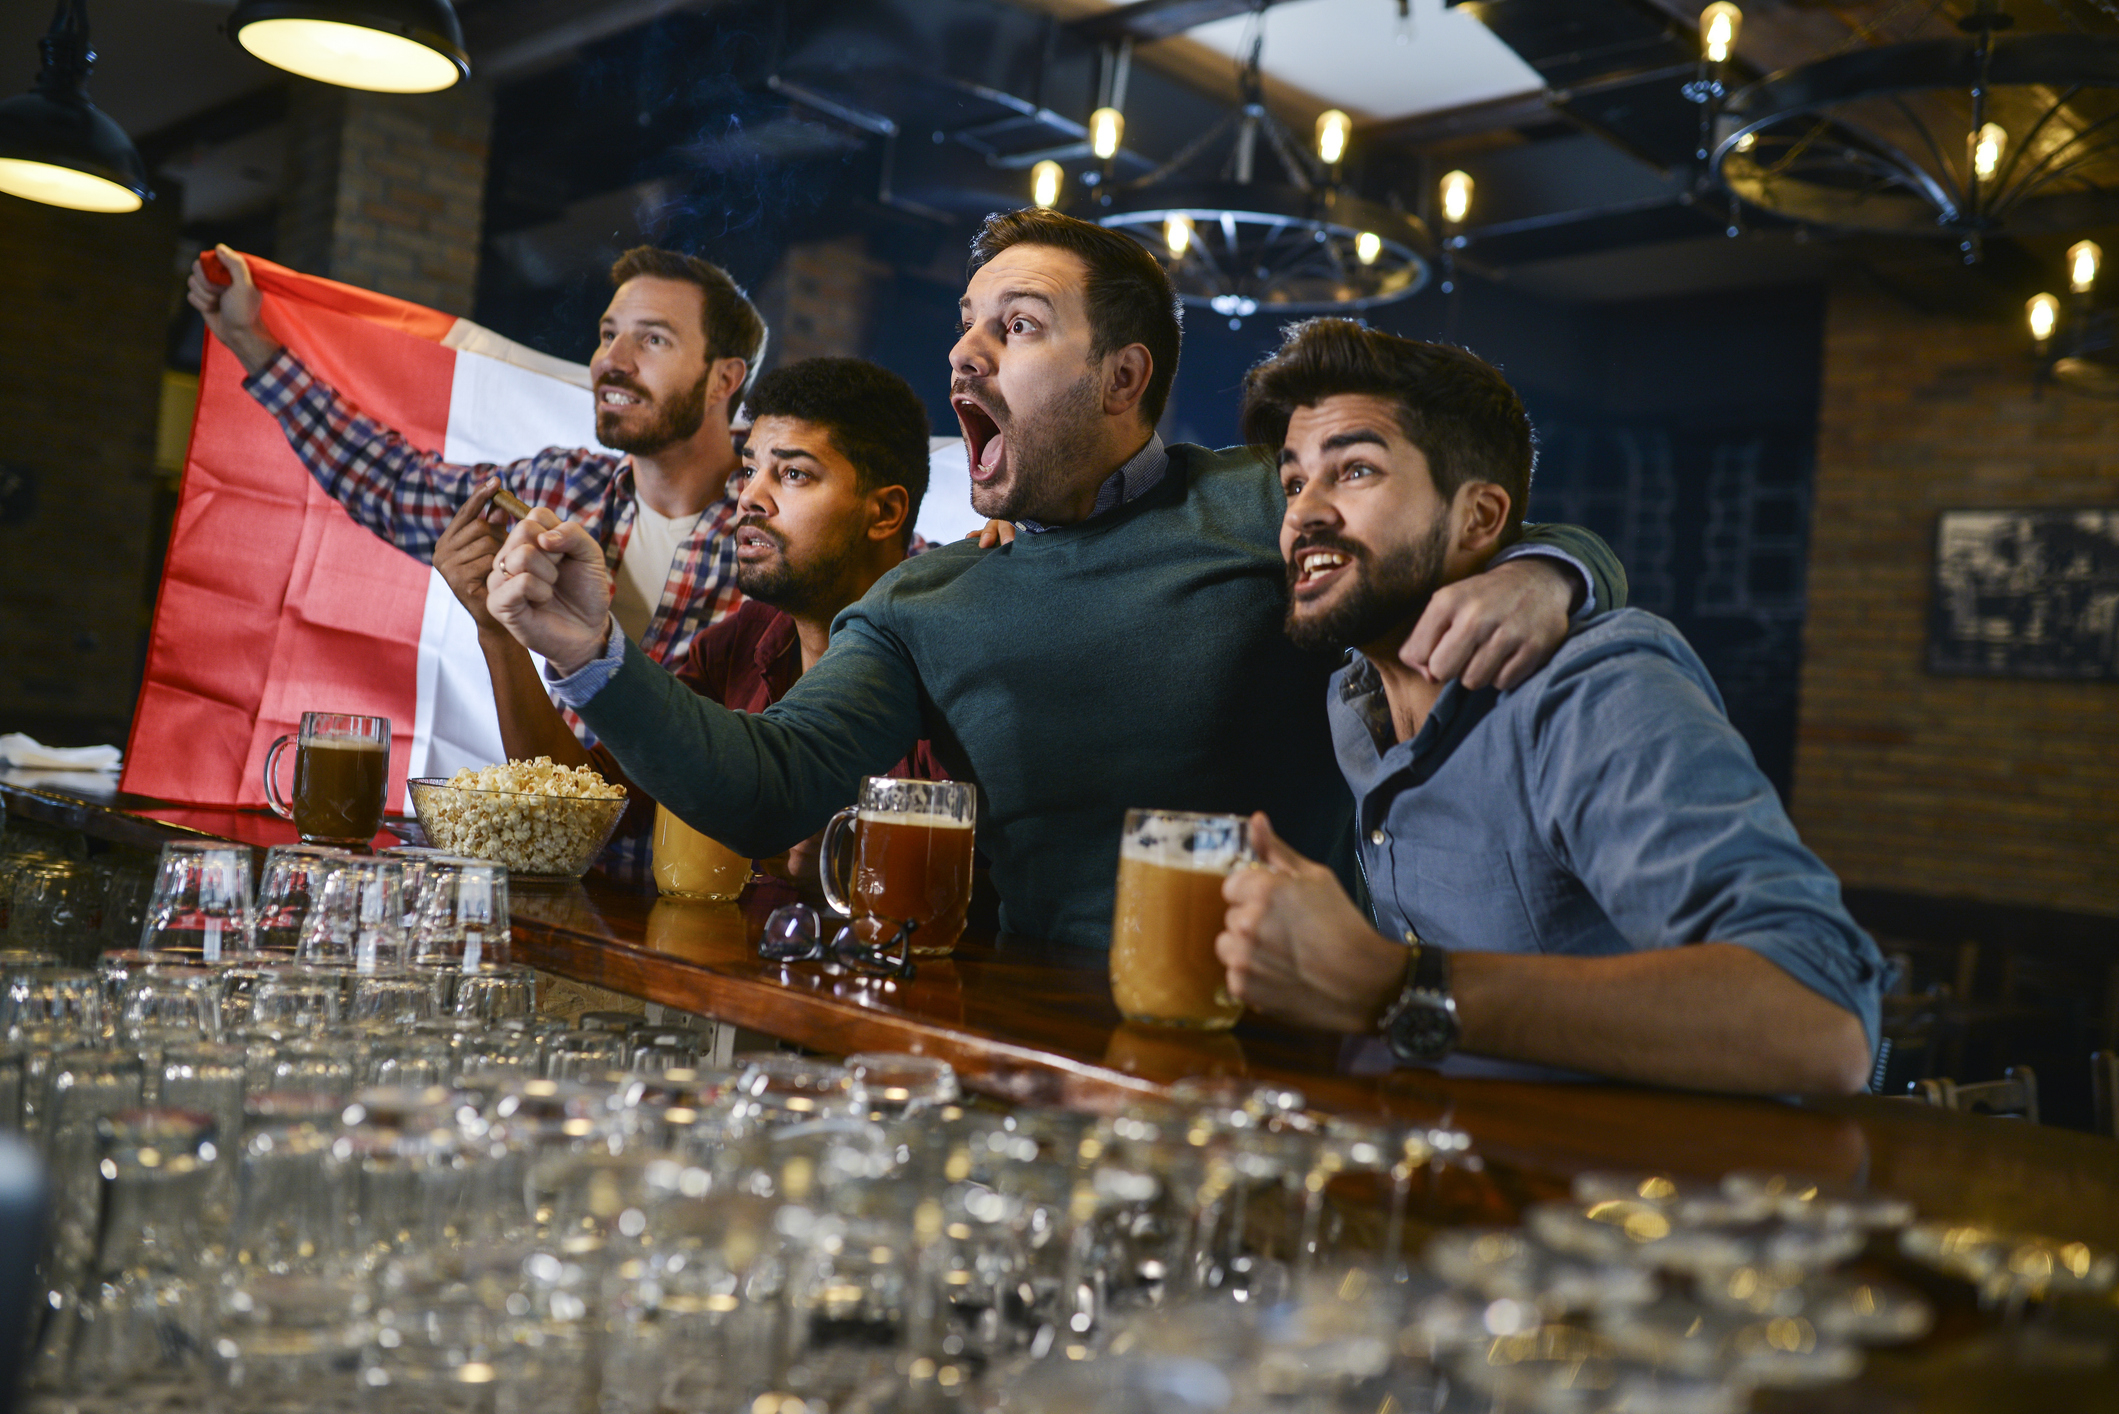 A group of four friends cheers and celebrates at a bar while watching a sports game, one holding a flag. Drinks and snacks are on the bar counter in front of them